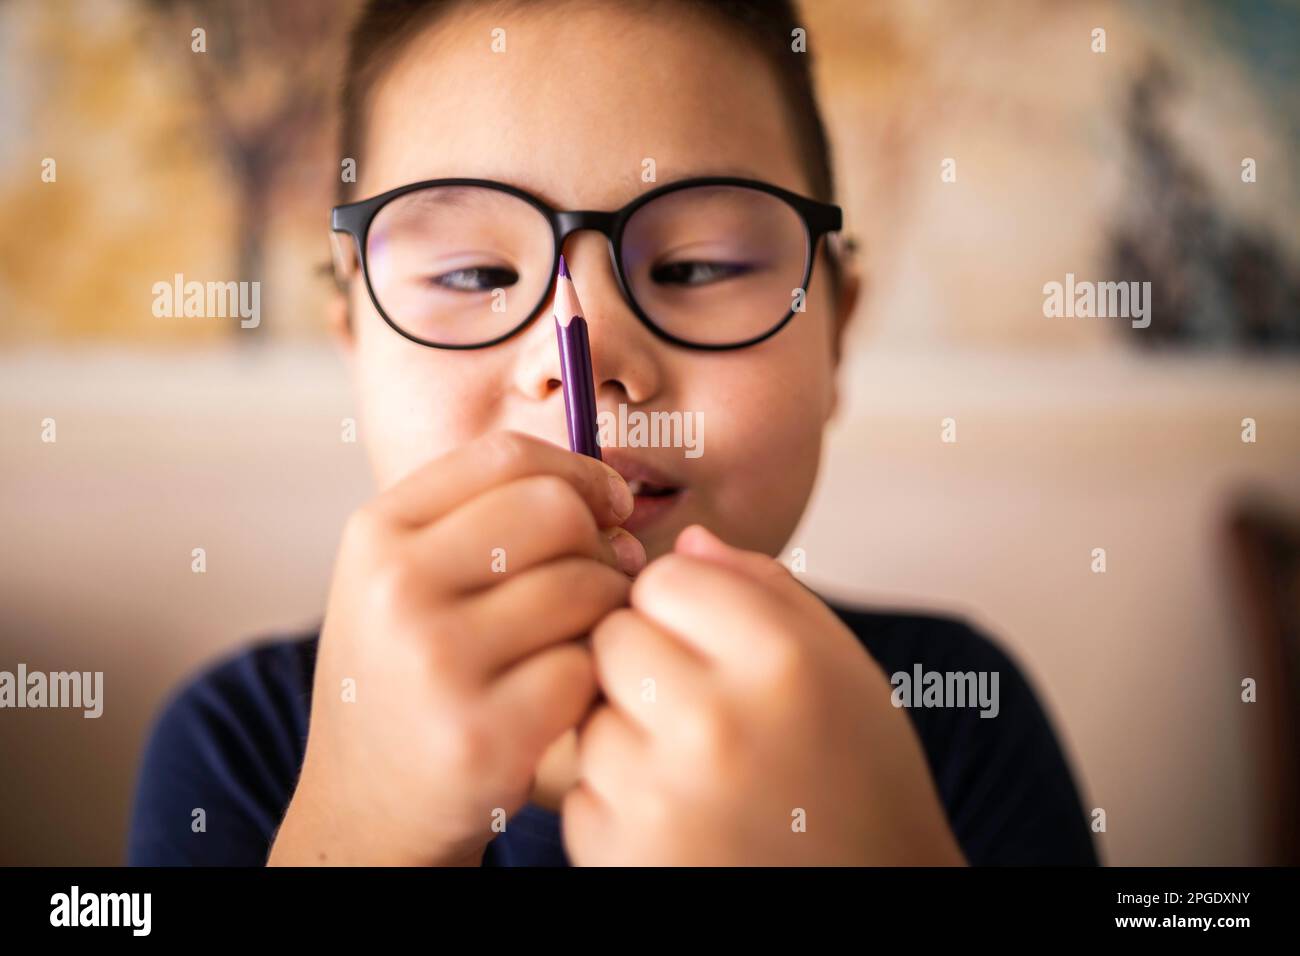 Smart young Asian boy wearing glasses squints at the pencil. The vision diseases problem. Stock Photo